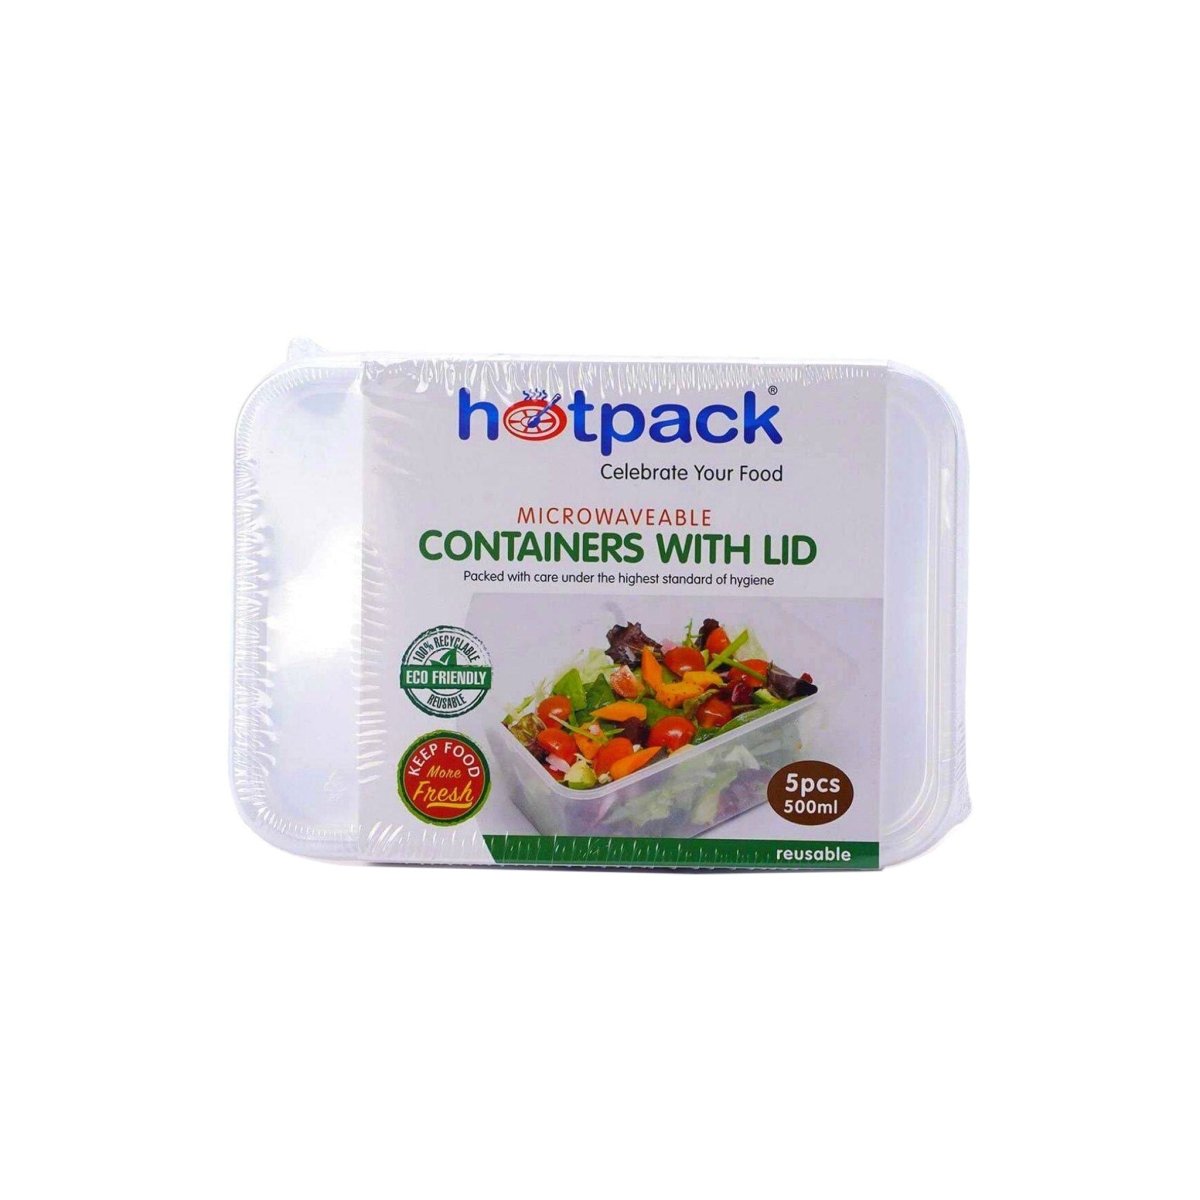 Microwave Food Container 500 ml With Lid 5 Pieces - hotpackwebstore.com - Microwavable Containers